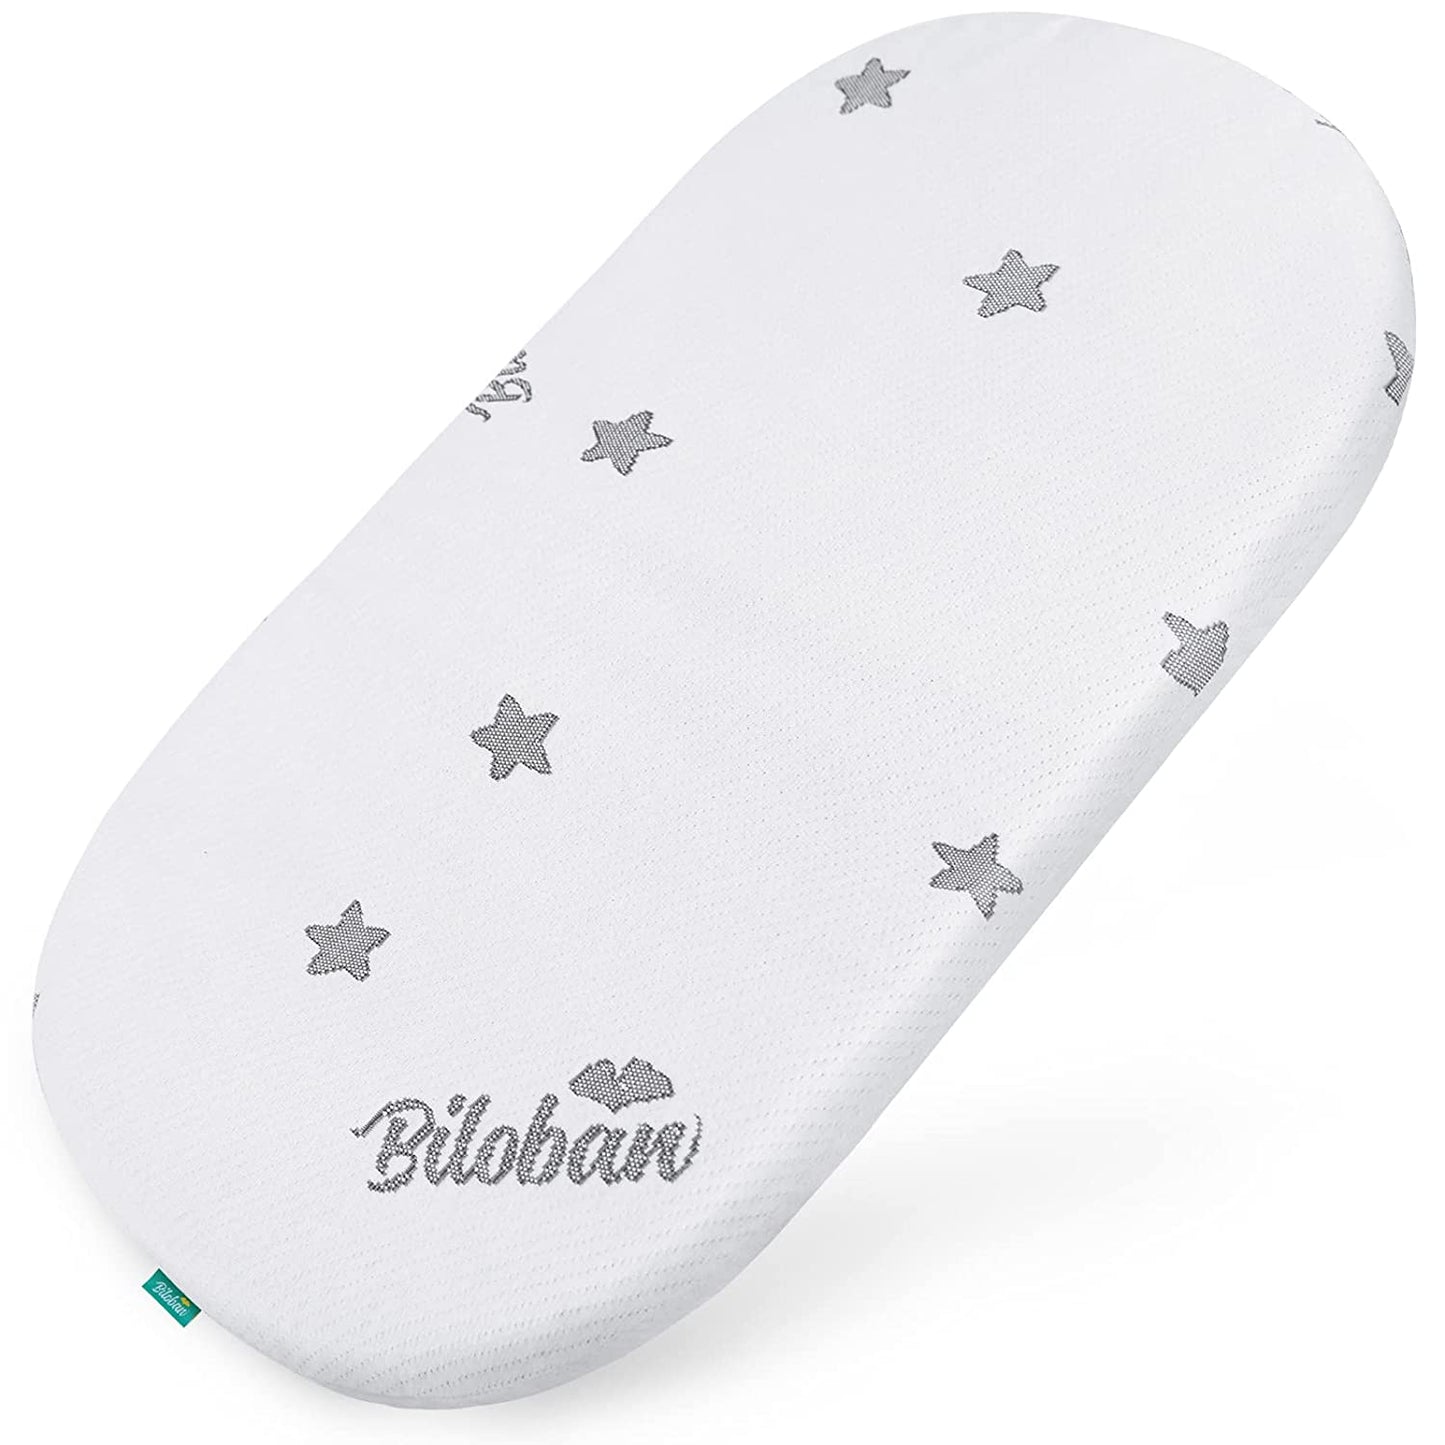 Bassinet Mattress with Waterproof & Breathable Cover, Fits Regalo Basic Baby Bassinet (Small) - Biloban Online Store